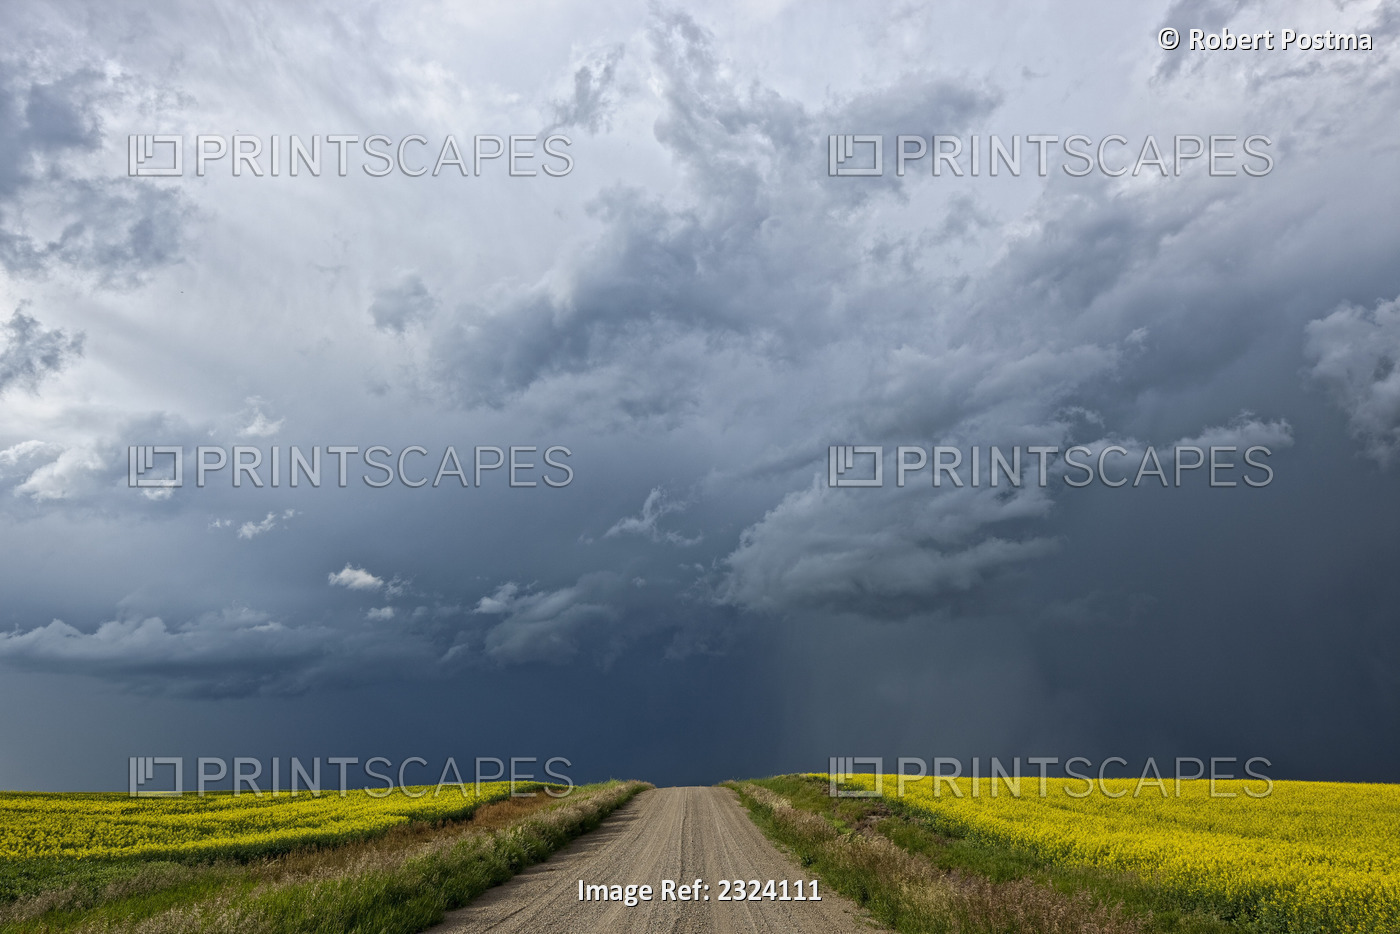 Storm Clouds Gather Over A Sunlit Canola Field And Road; Alberta, Canada